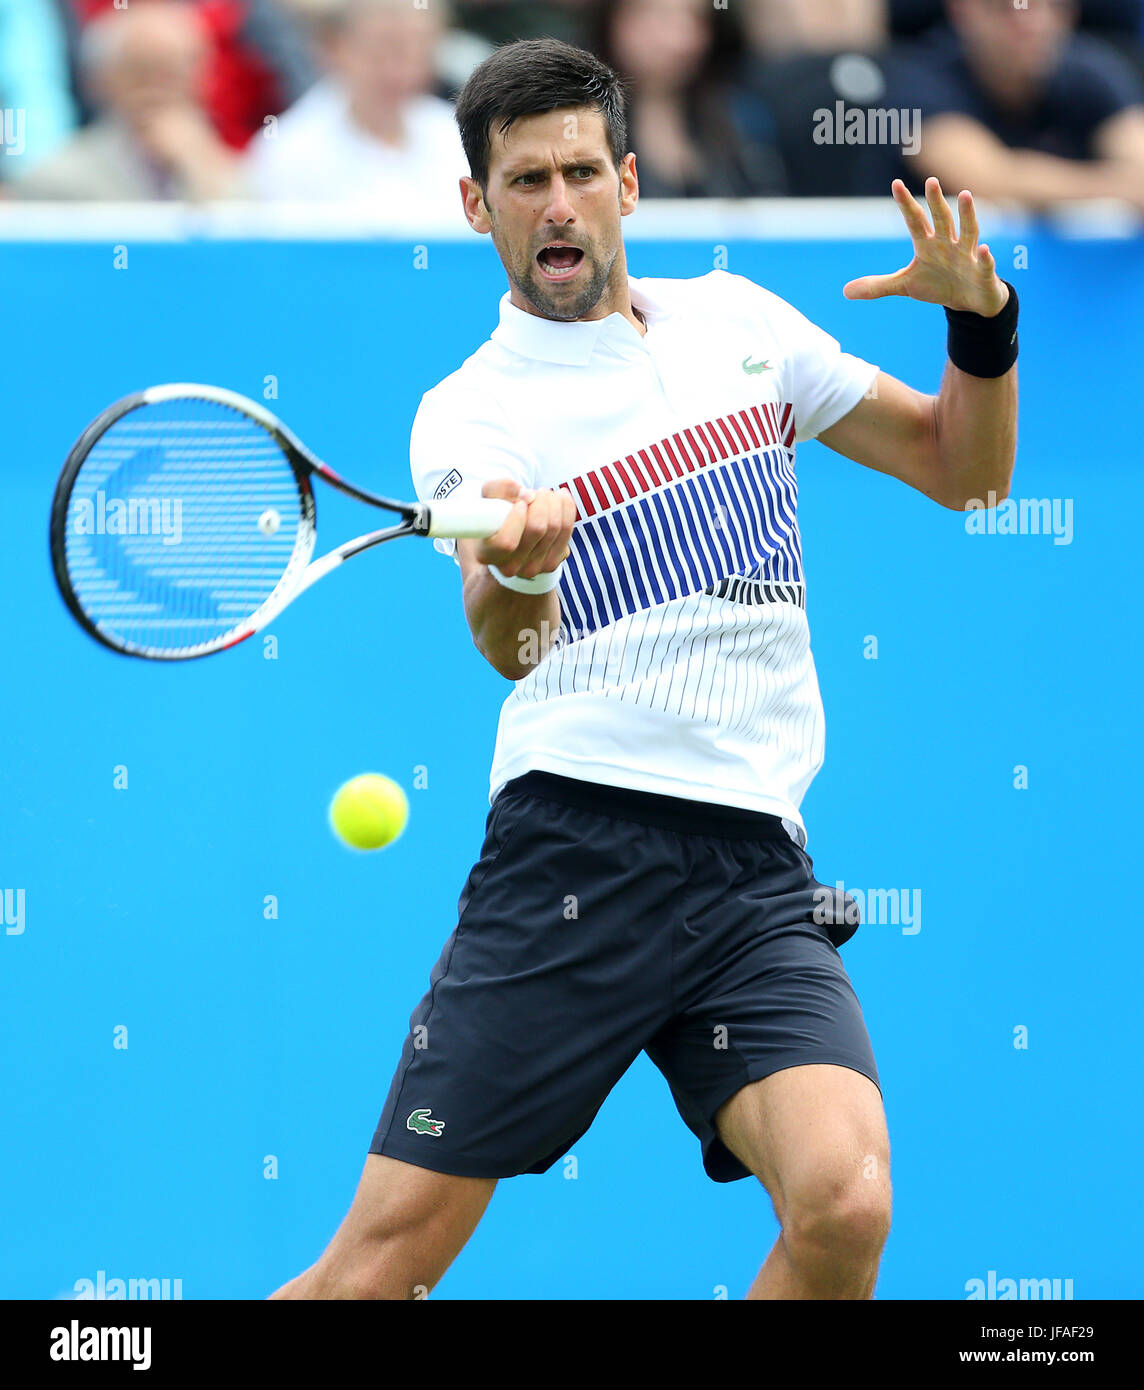 Eastbourne, UK. 30th June, 2017. Novak Djokovic of Serbia in action against Daniil Medvedev of Russia in the semi final during day Six of the Aegon International Eastbourne on June 30, 2017 in Eastbourne, England Credit: Paul Terry Photo/Alamy Live News Stock Photo